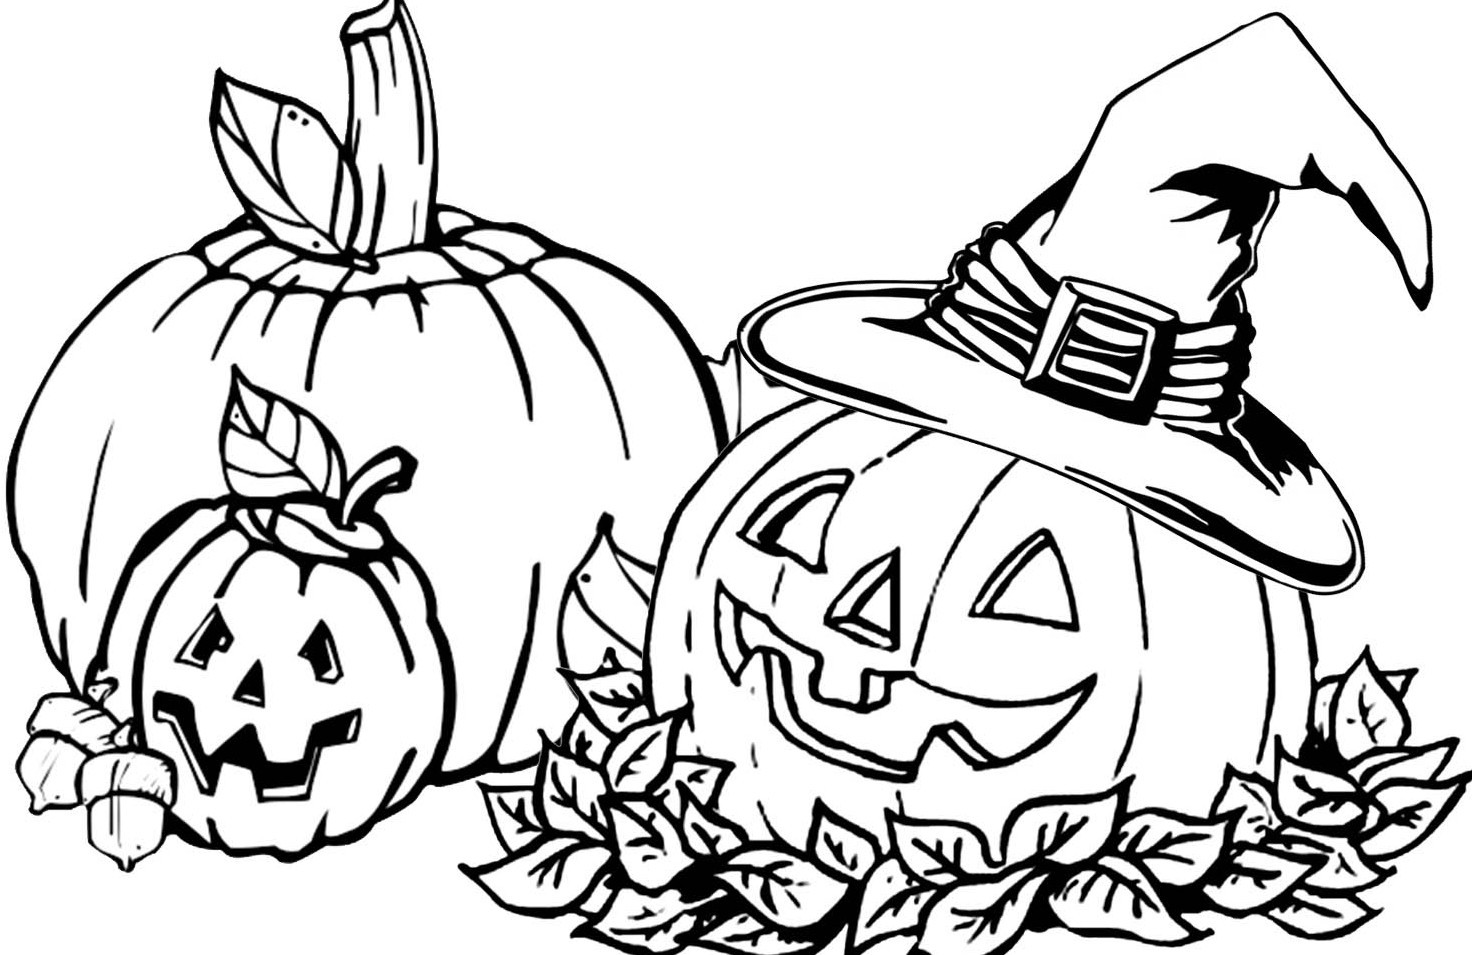 Pumpkin Coloring Pages For Kids
 Pumpkin Coloring Pages